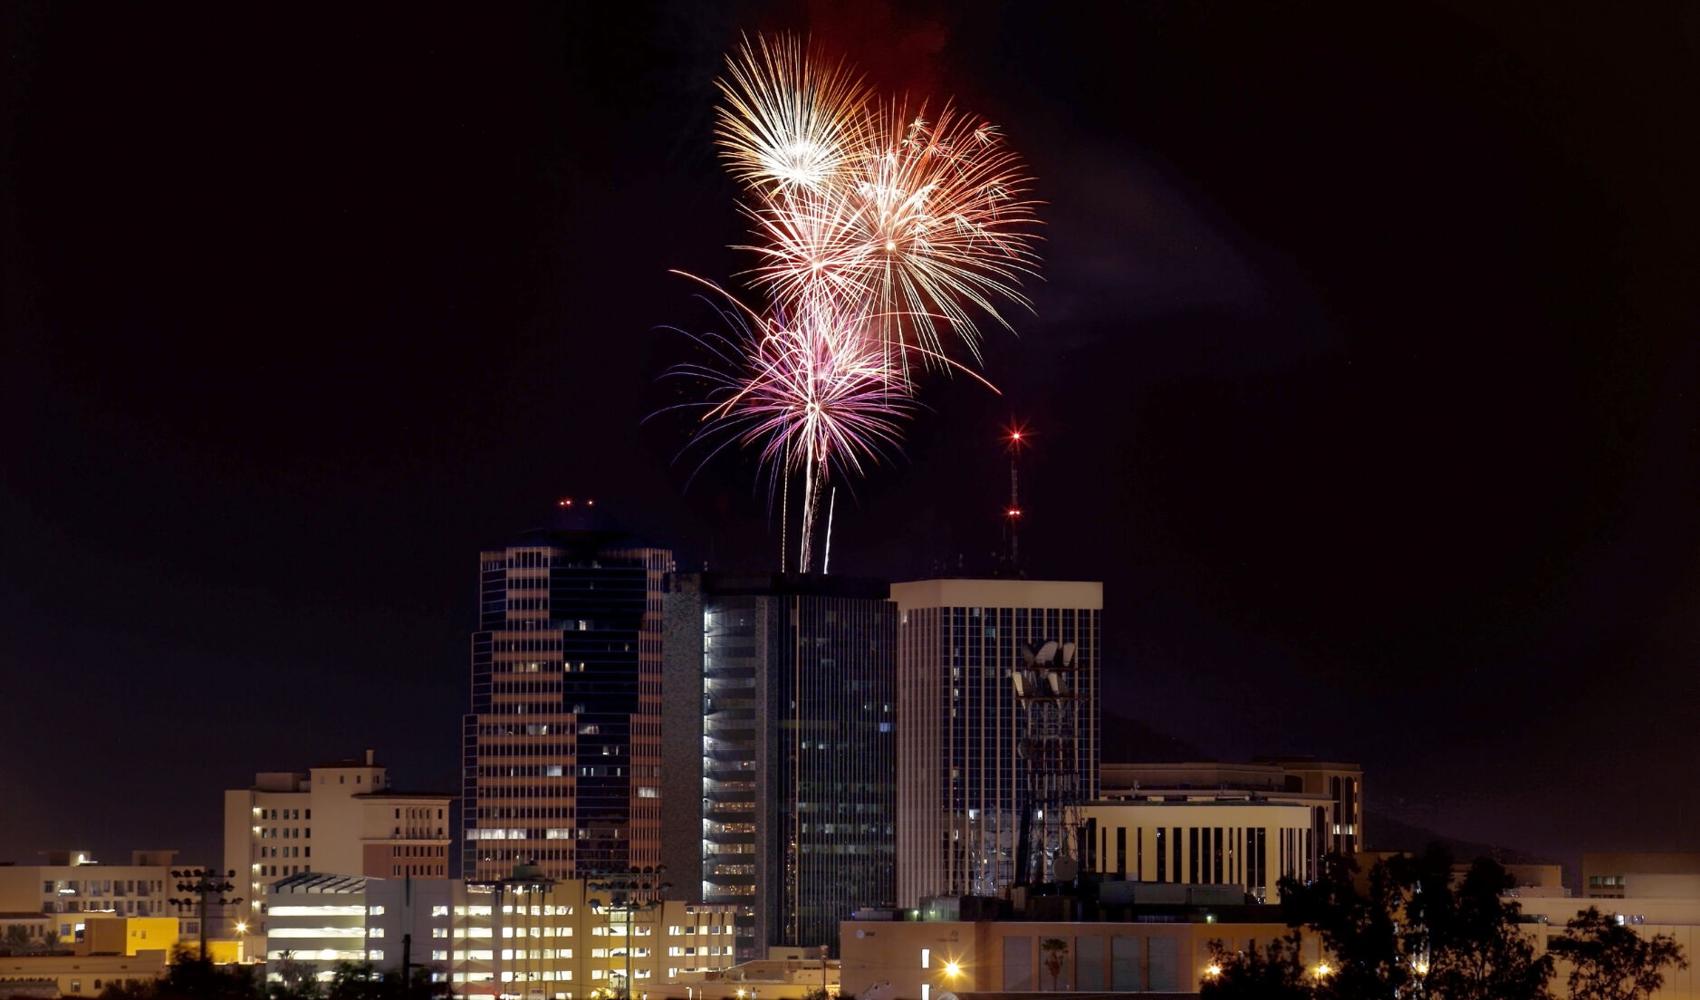 Fireworks return to the Tucson area for Fourth of July